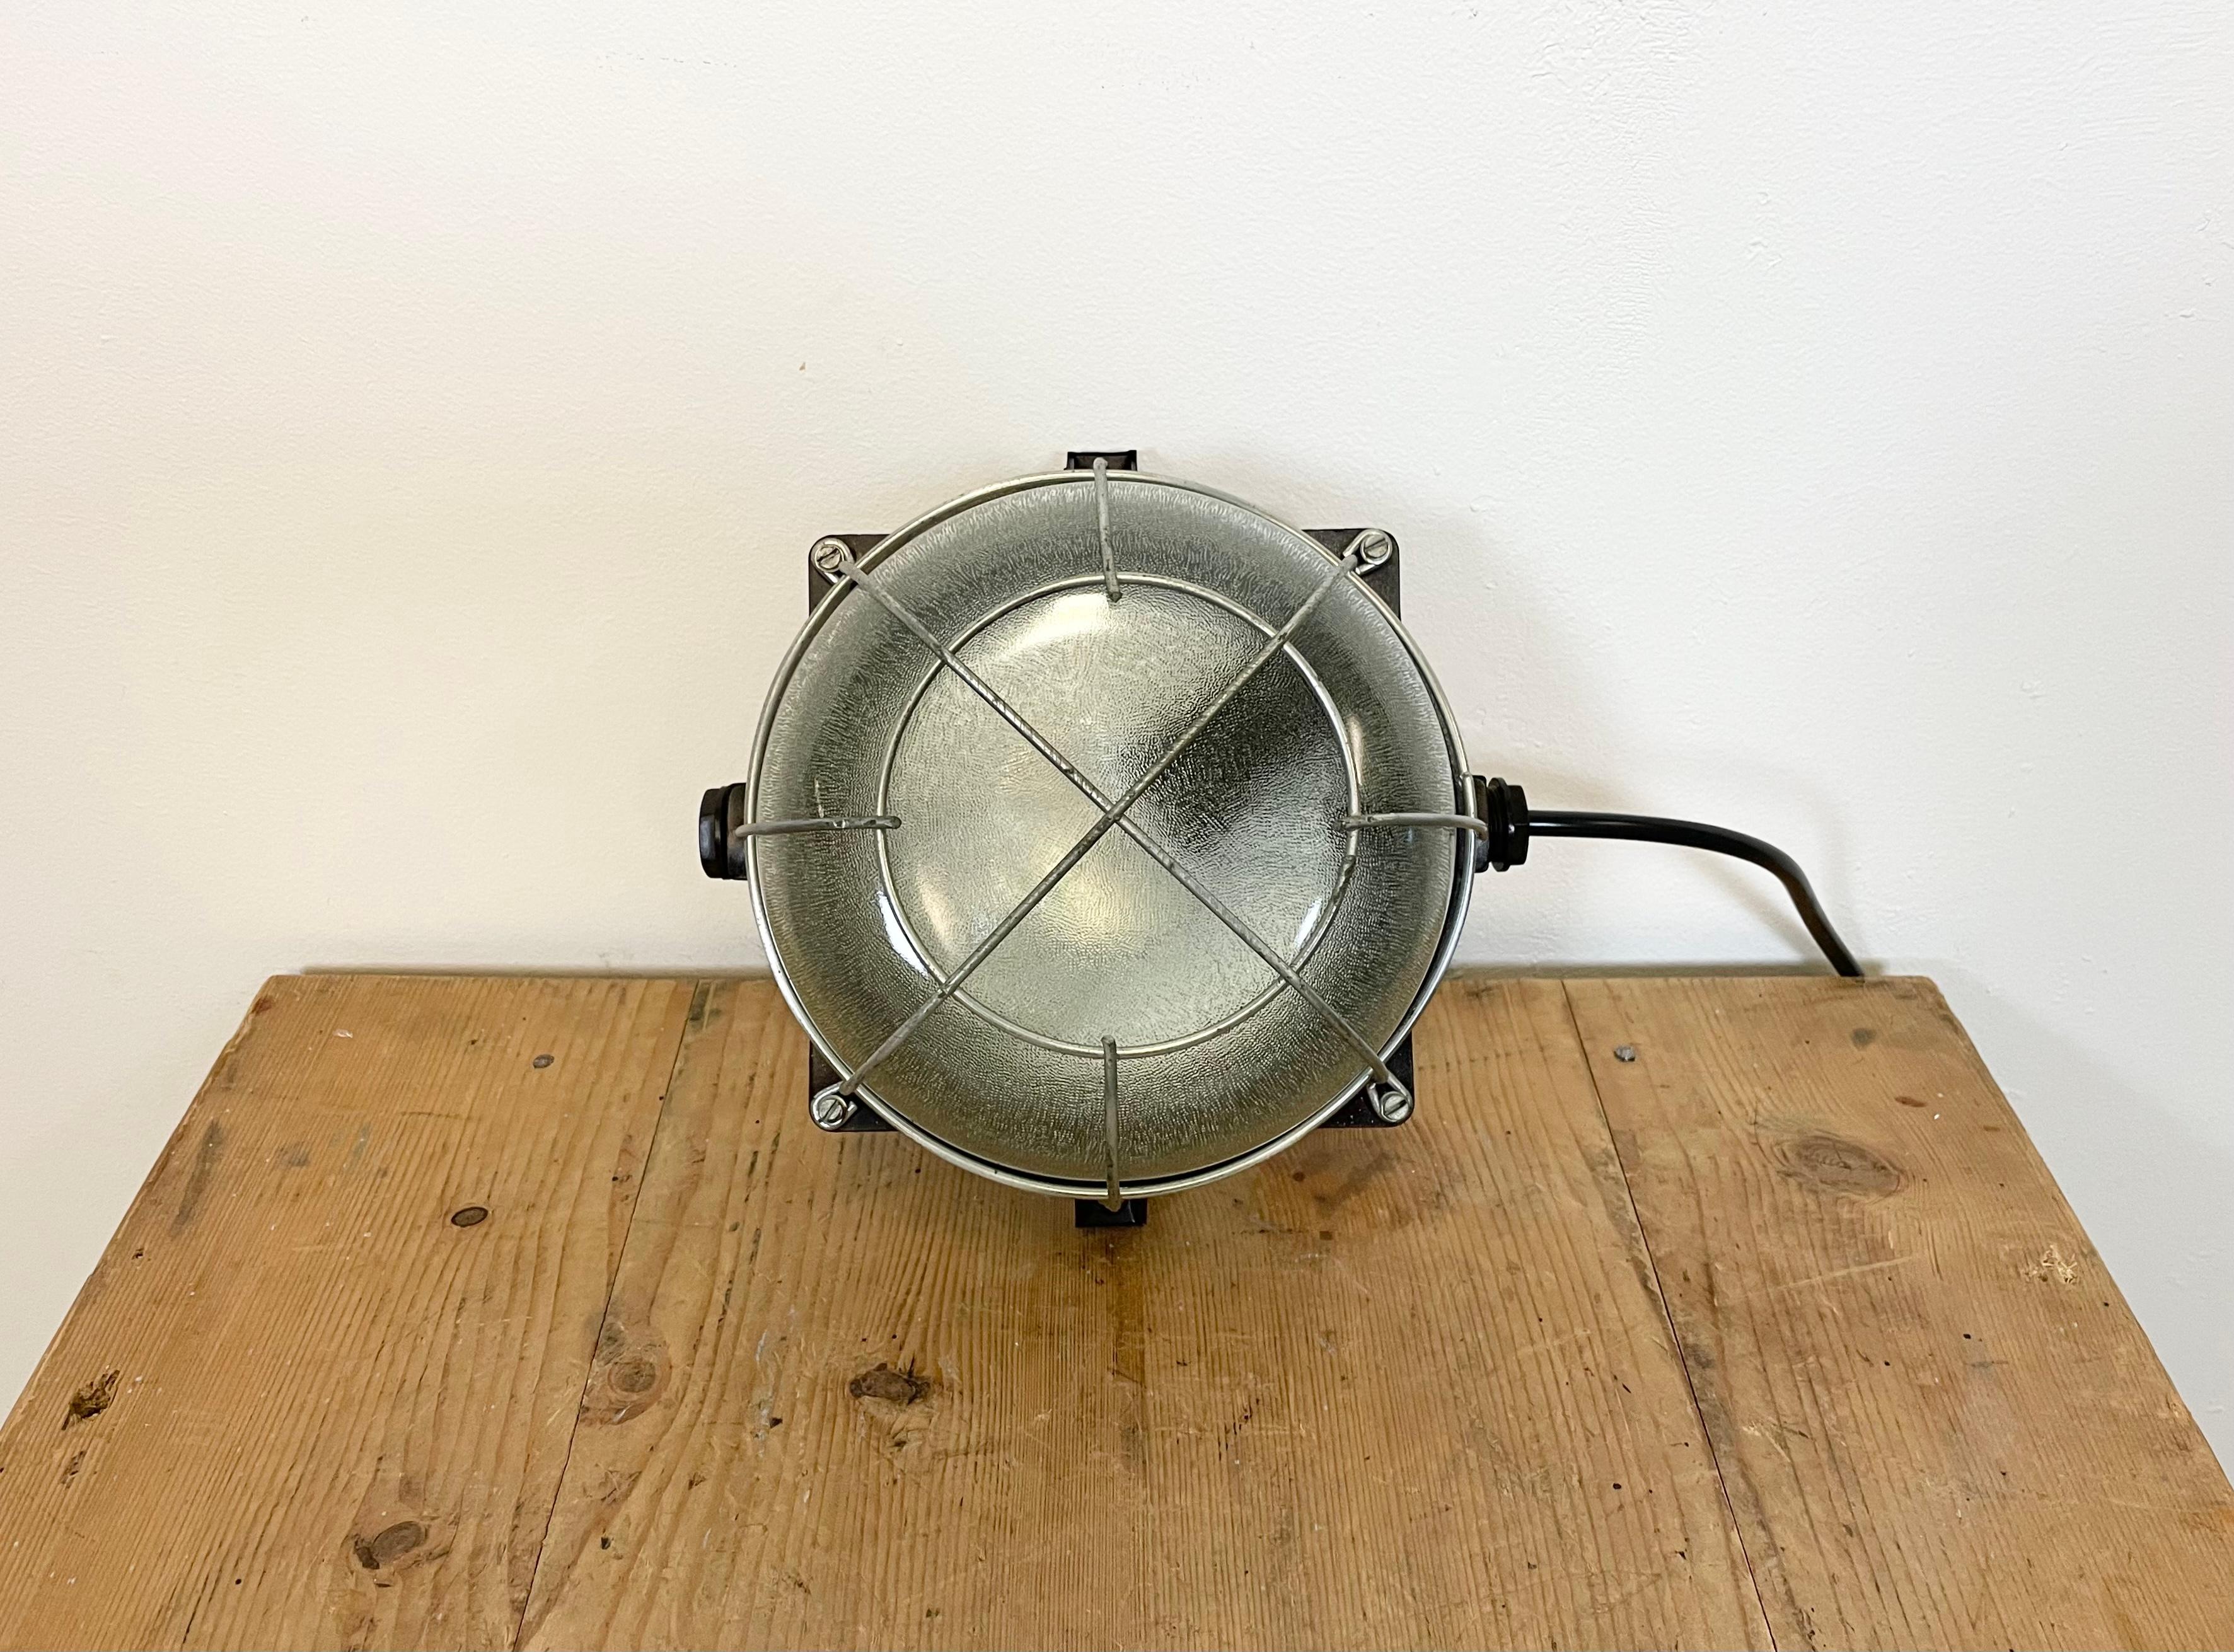 Vintage industrial bakelite wall lamp made in former Czechoslovakia during the 1970s. It features a bakelite body, frosted curved glass cover and iron protective grid. The socket requires E 27 light bulbs. It can be also used as a ceiling lamp.